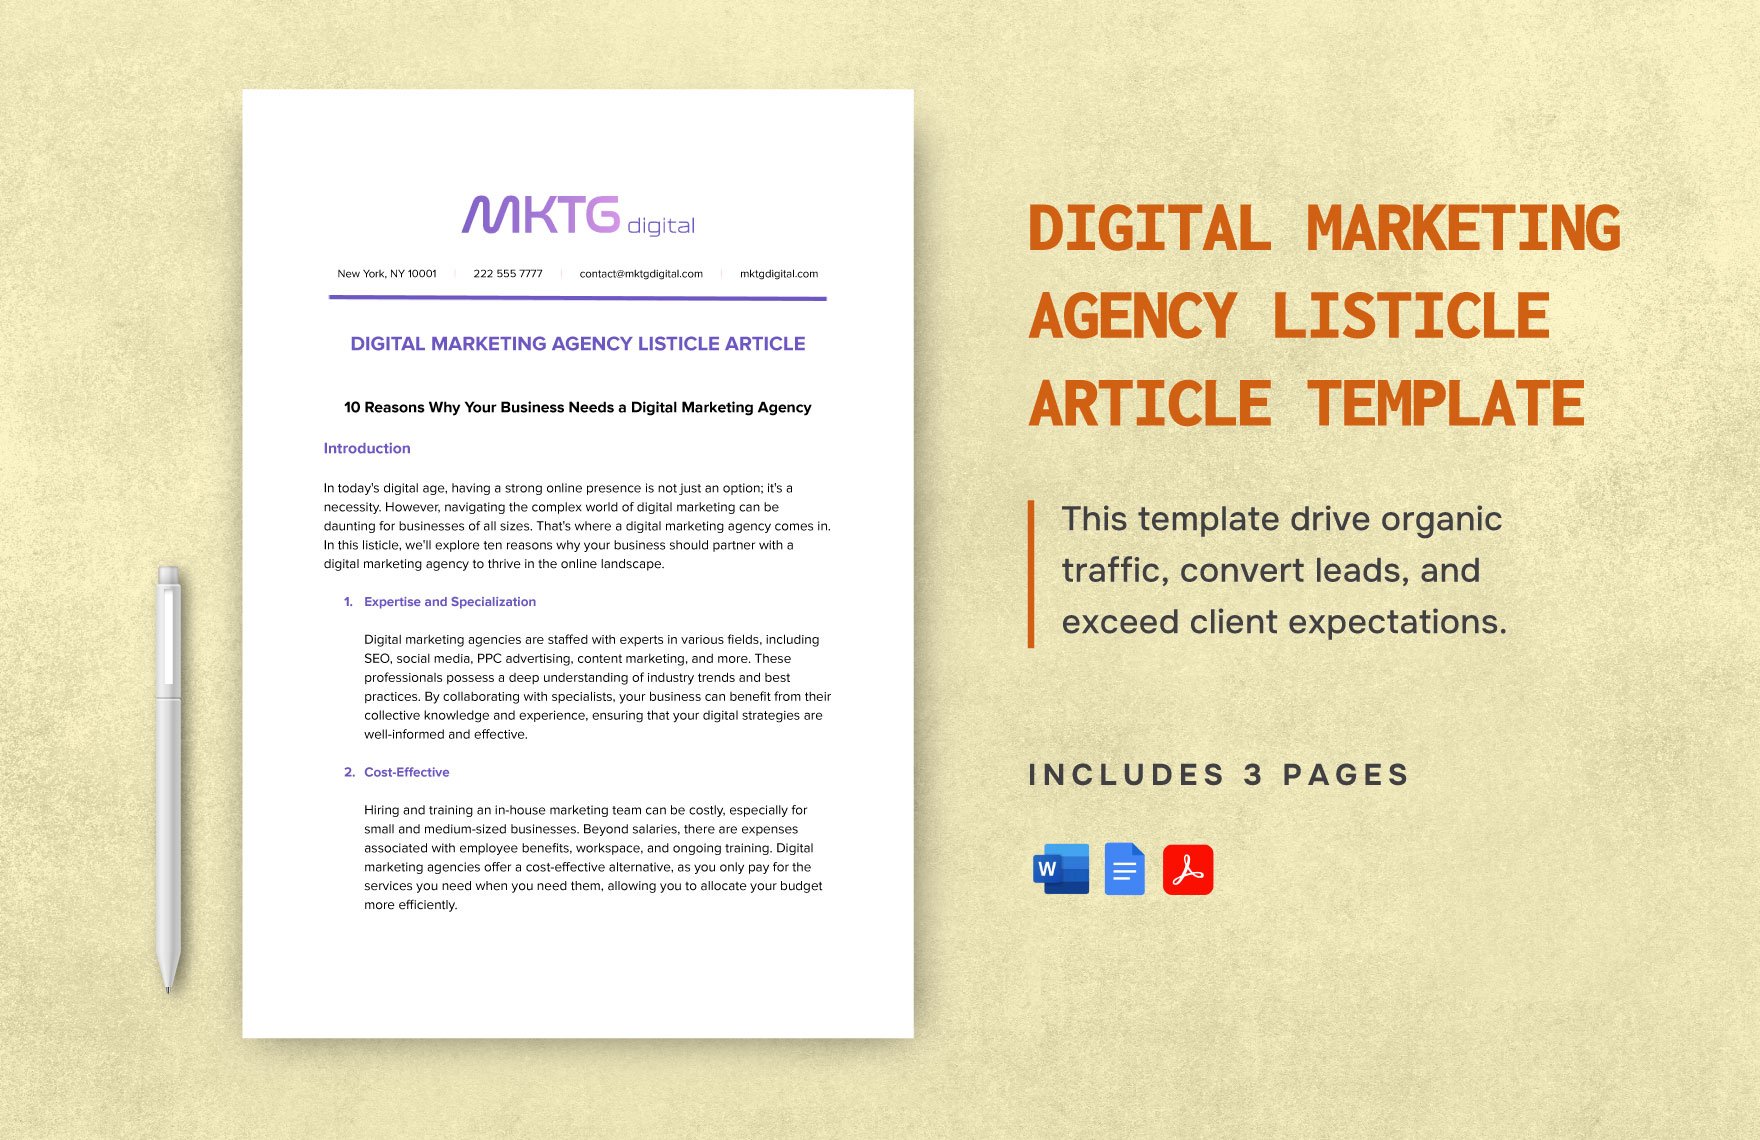 Digital Marketing Agency Listicle Article Template in Word, Google Docs, PDF